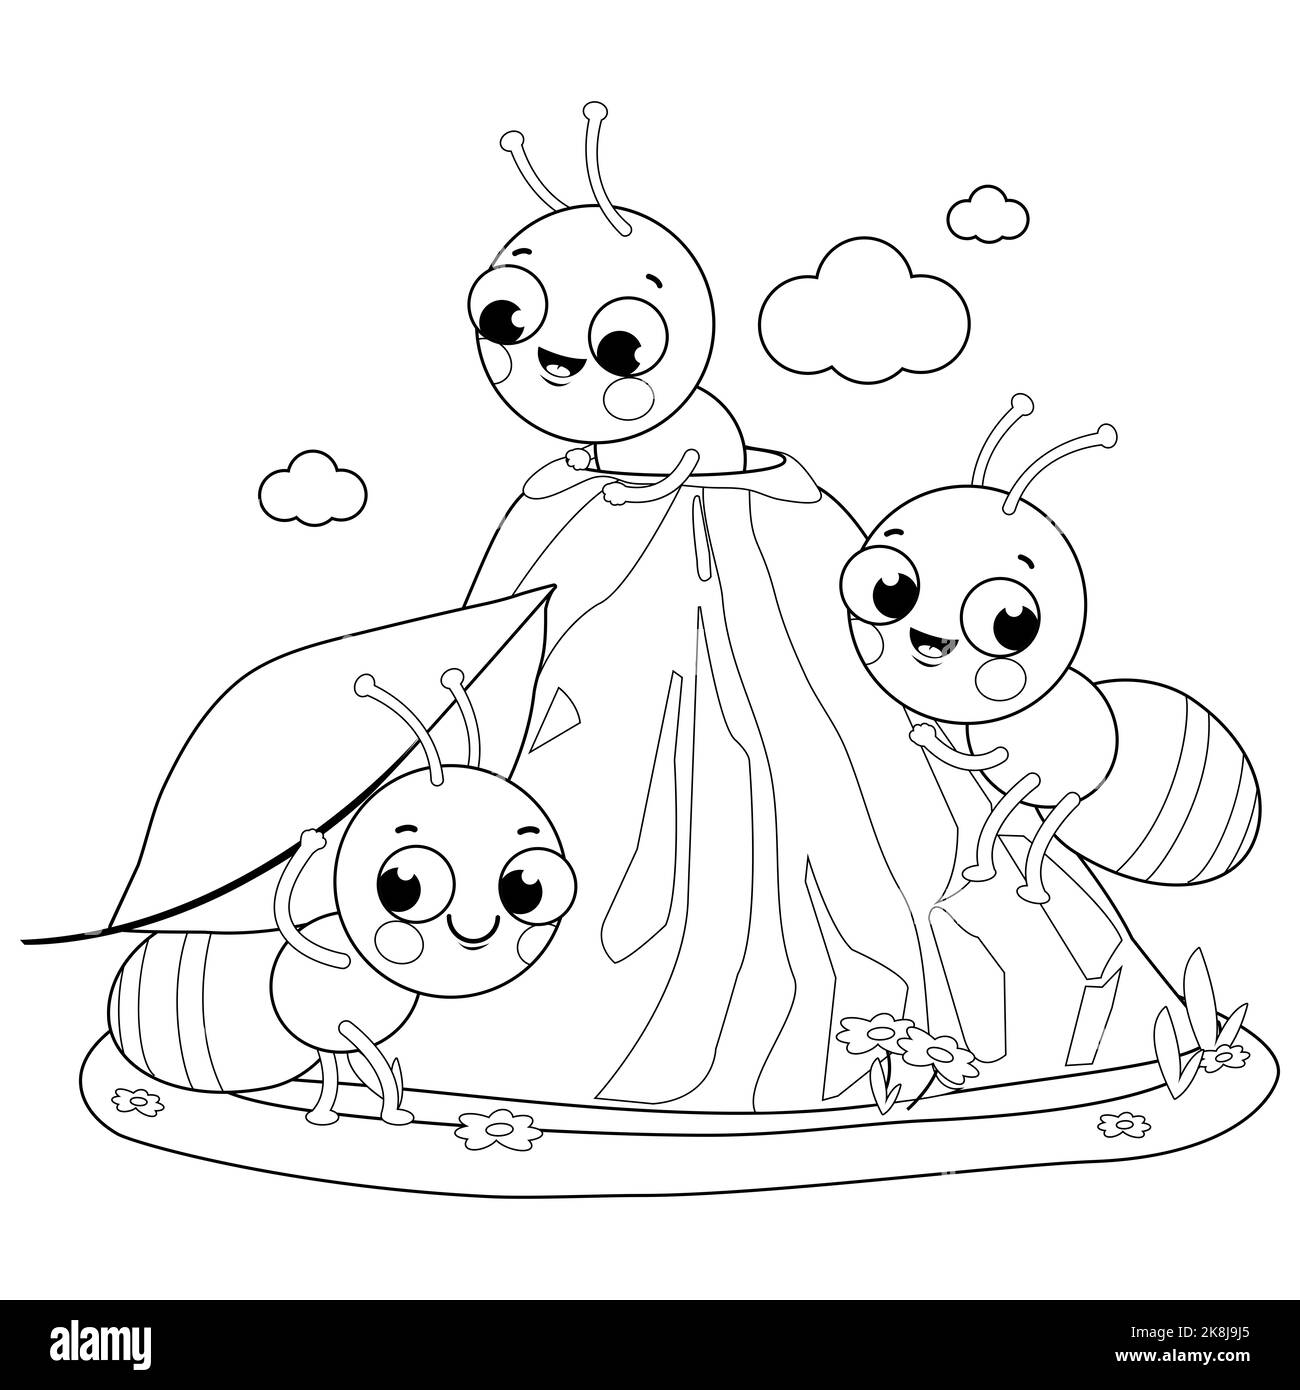 Ants in ant hill carrying food into their nest. Black and white coloring page Stock Photo